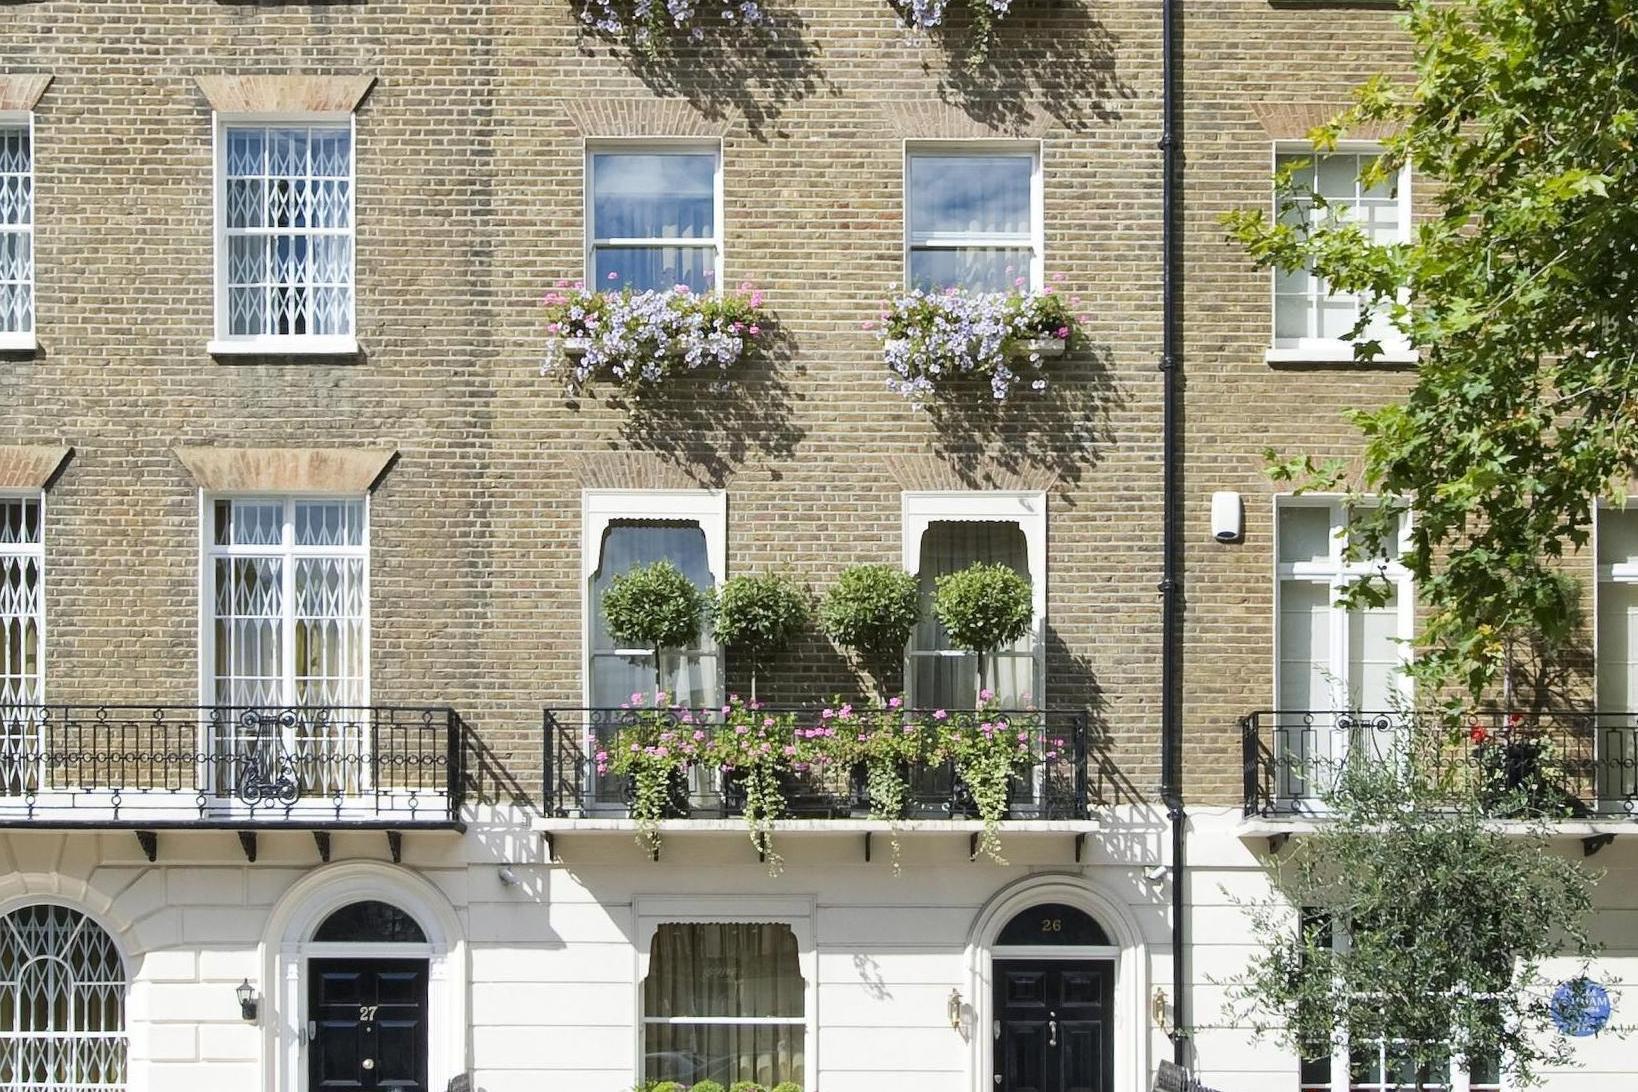 Kensington and Chelsea, the capital’s costliest borough with an average property price of about £2m, led the declines with a 2.6 per cent drop